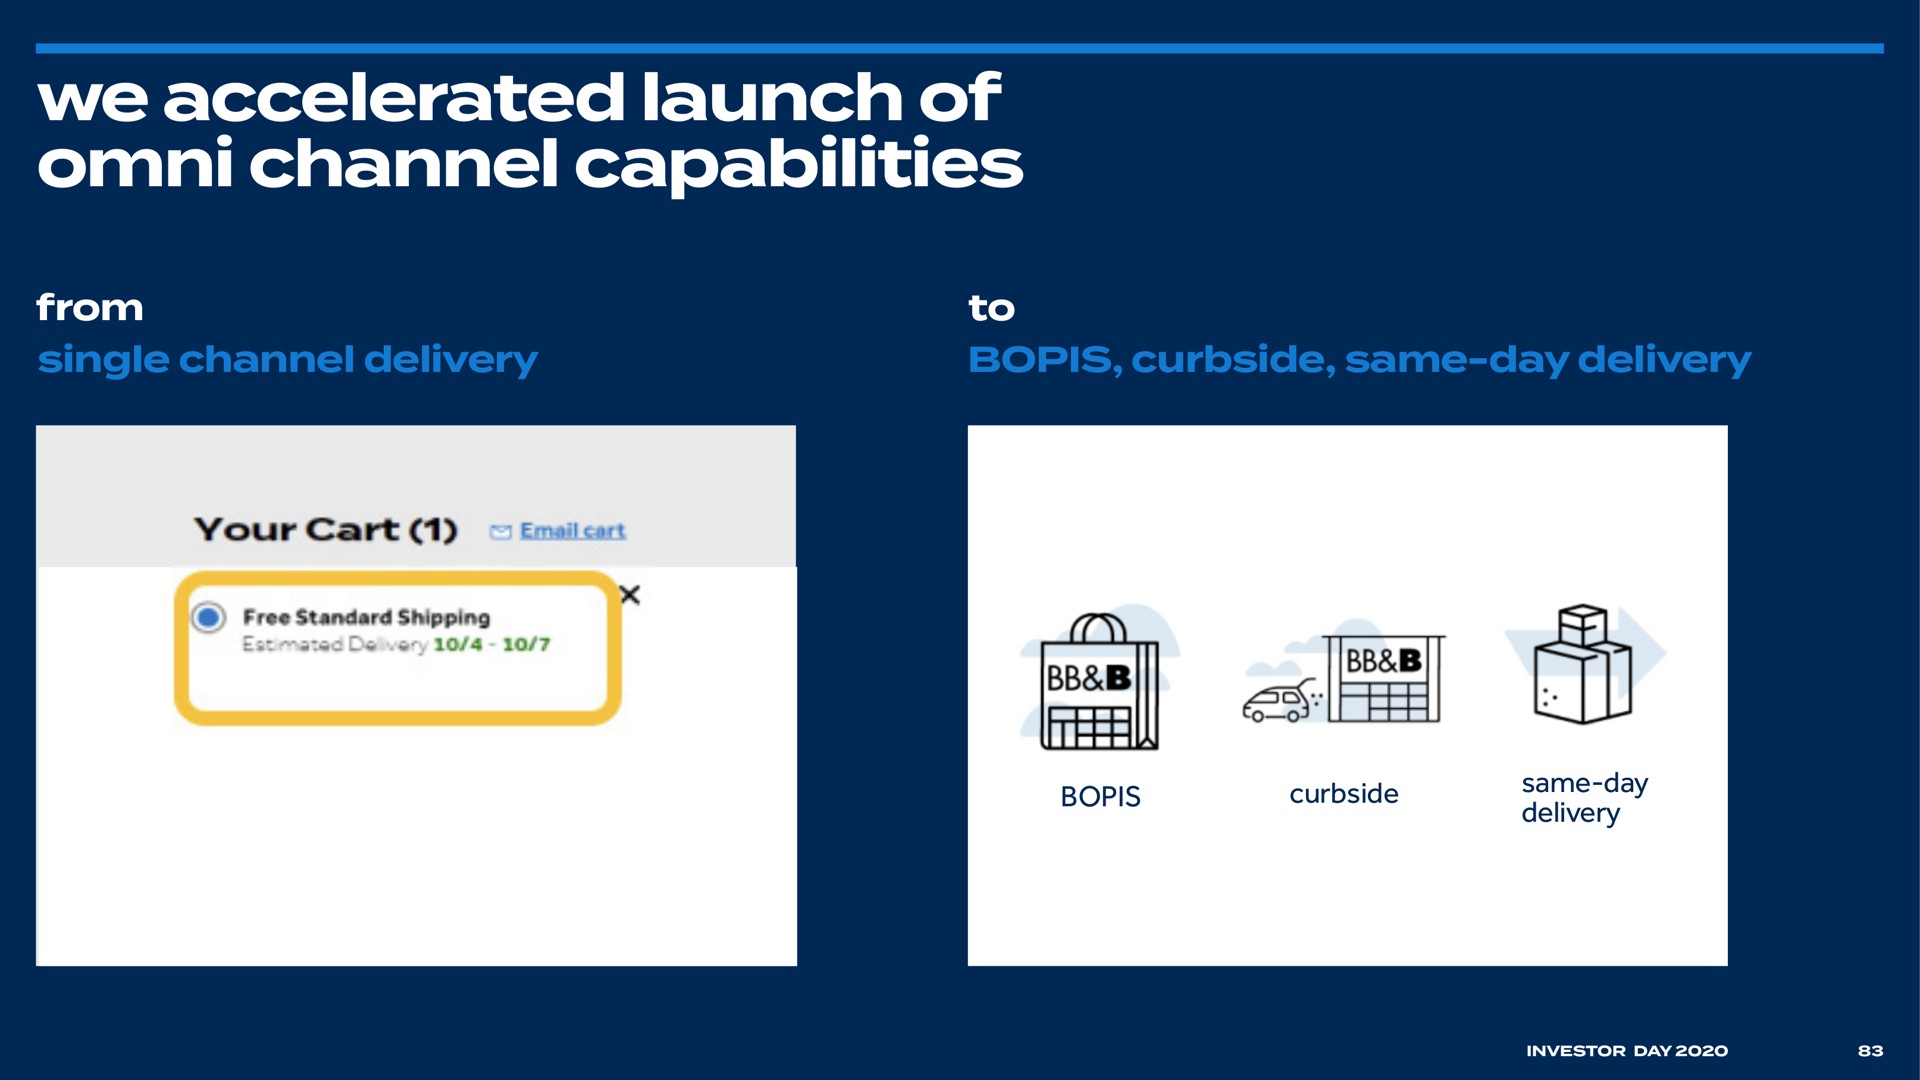 we accelerated launch of channel capabilities | Bed Bath & Beyond